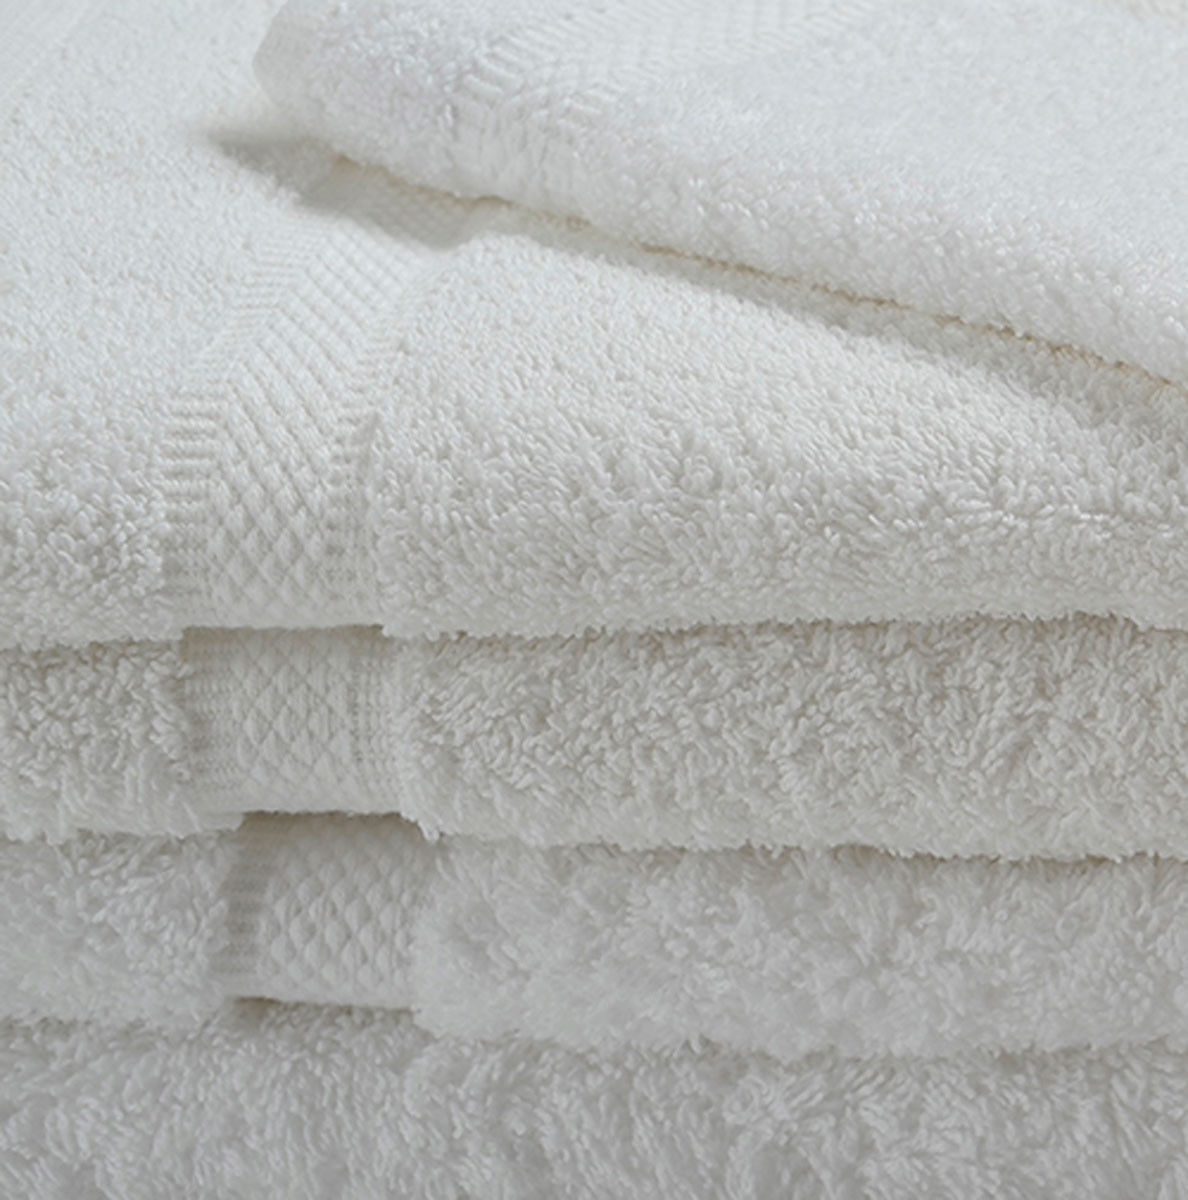 Do oxford imperiale towels come in colors other than white?